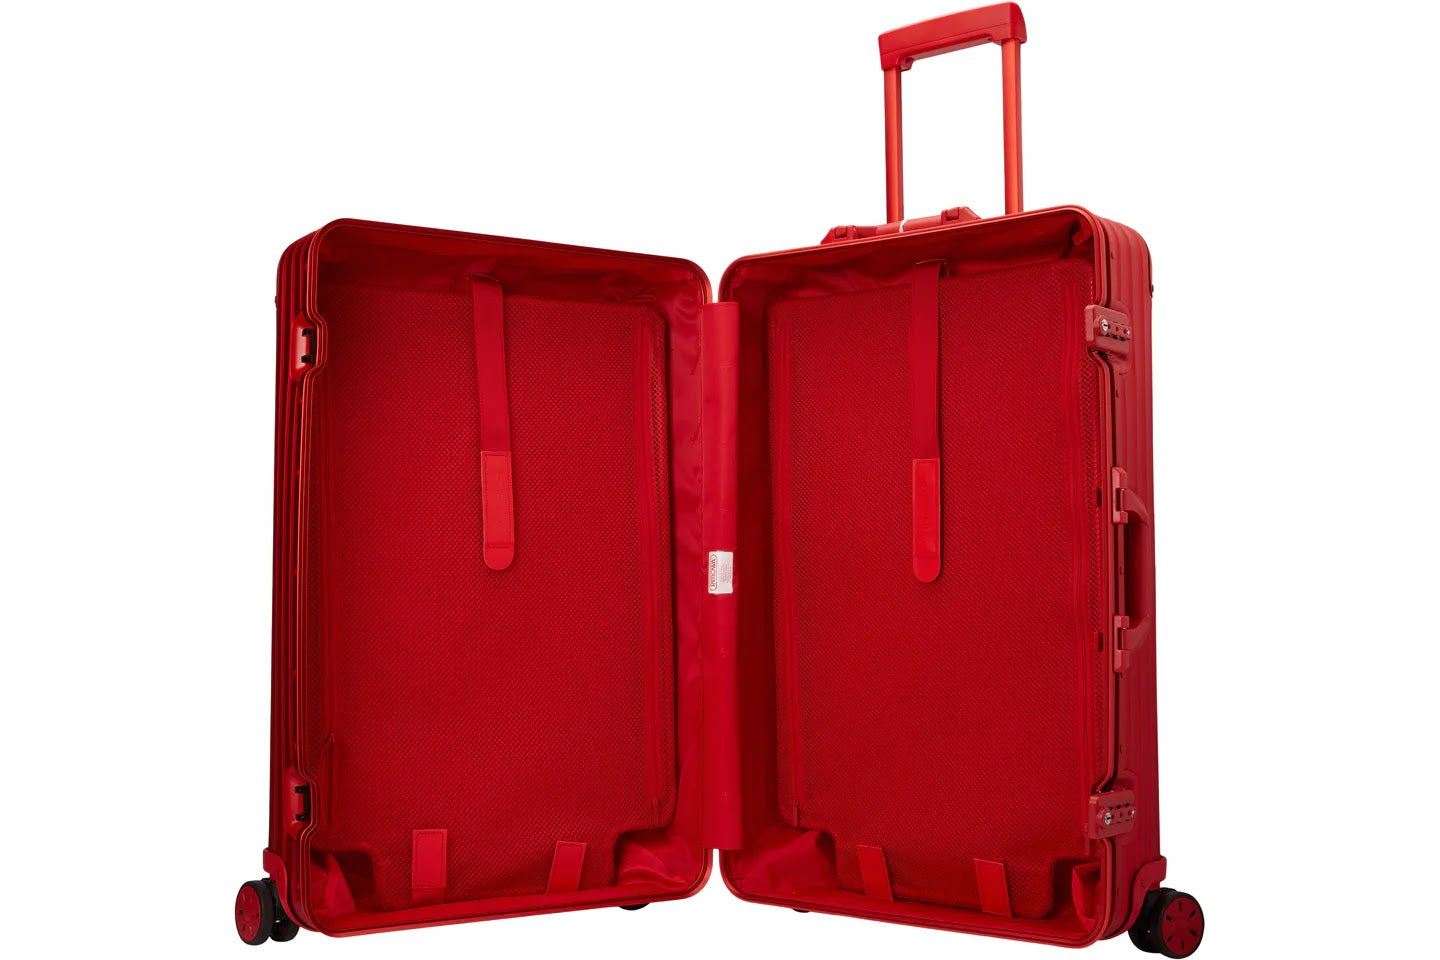 Supreme x Rimowa Topas Multiwheel 82L Suitcase - Red Suitcases, Luggage -  SPXRM20066